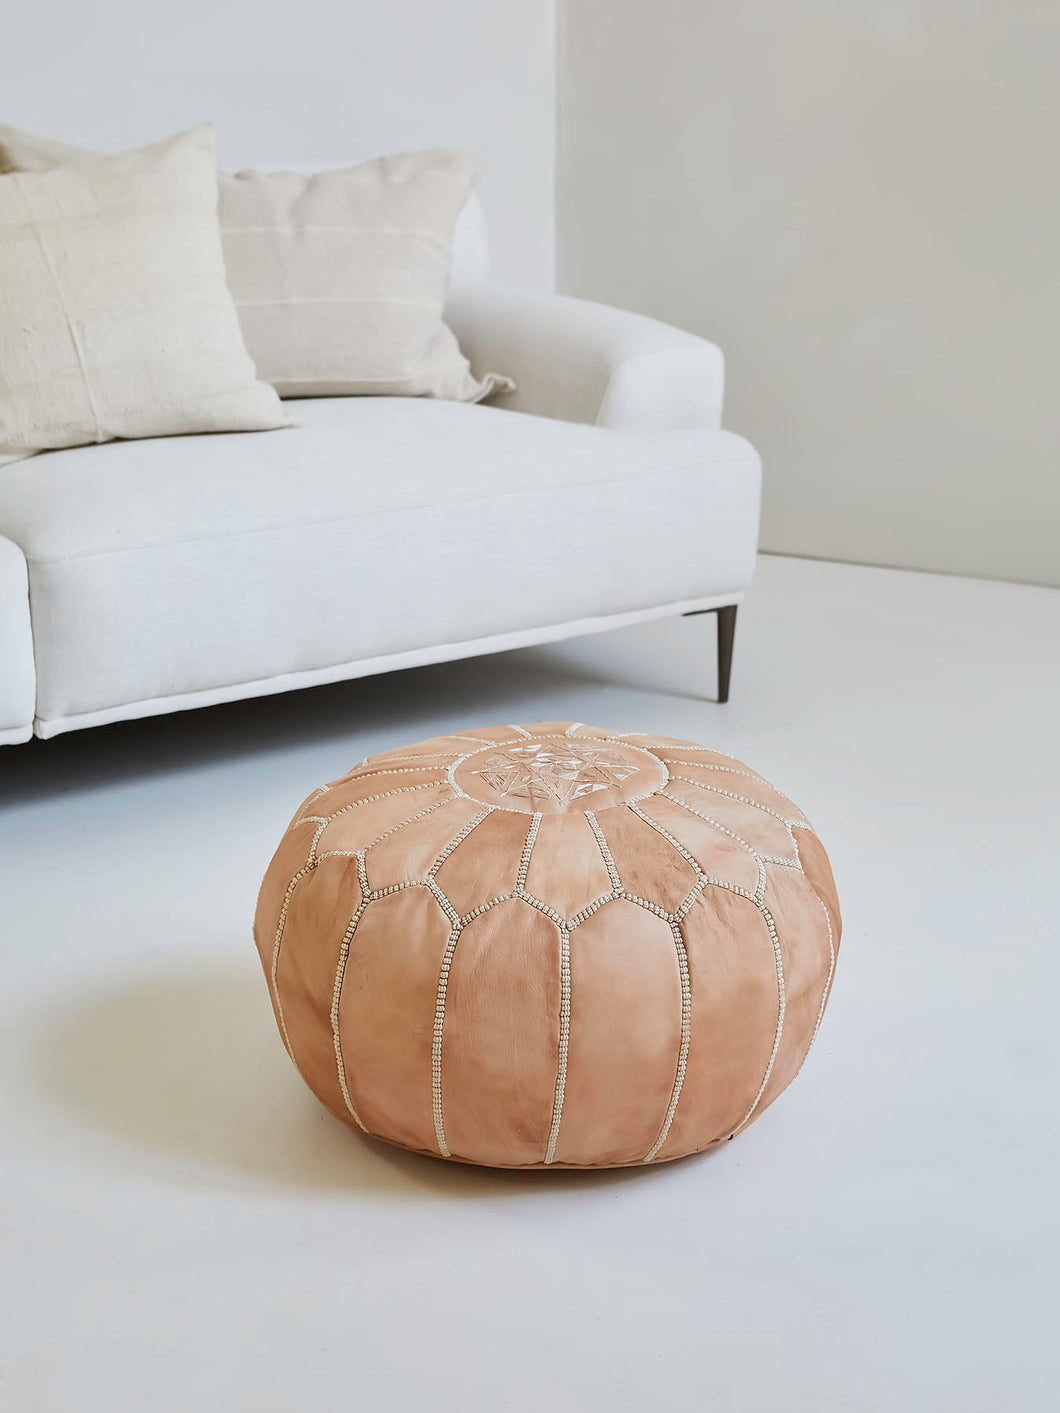 Stitched Hand-Knotted Moroccan Leather Pouf